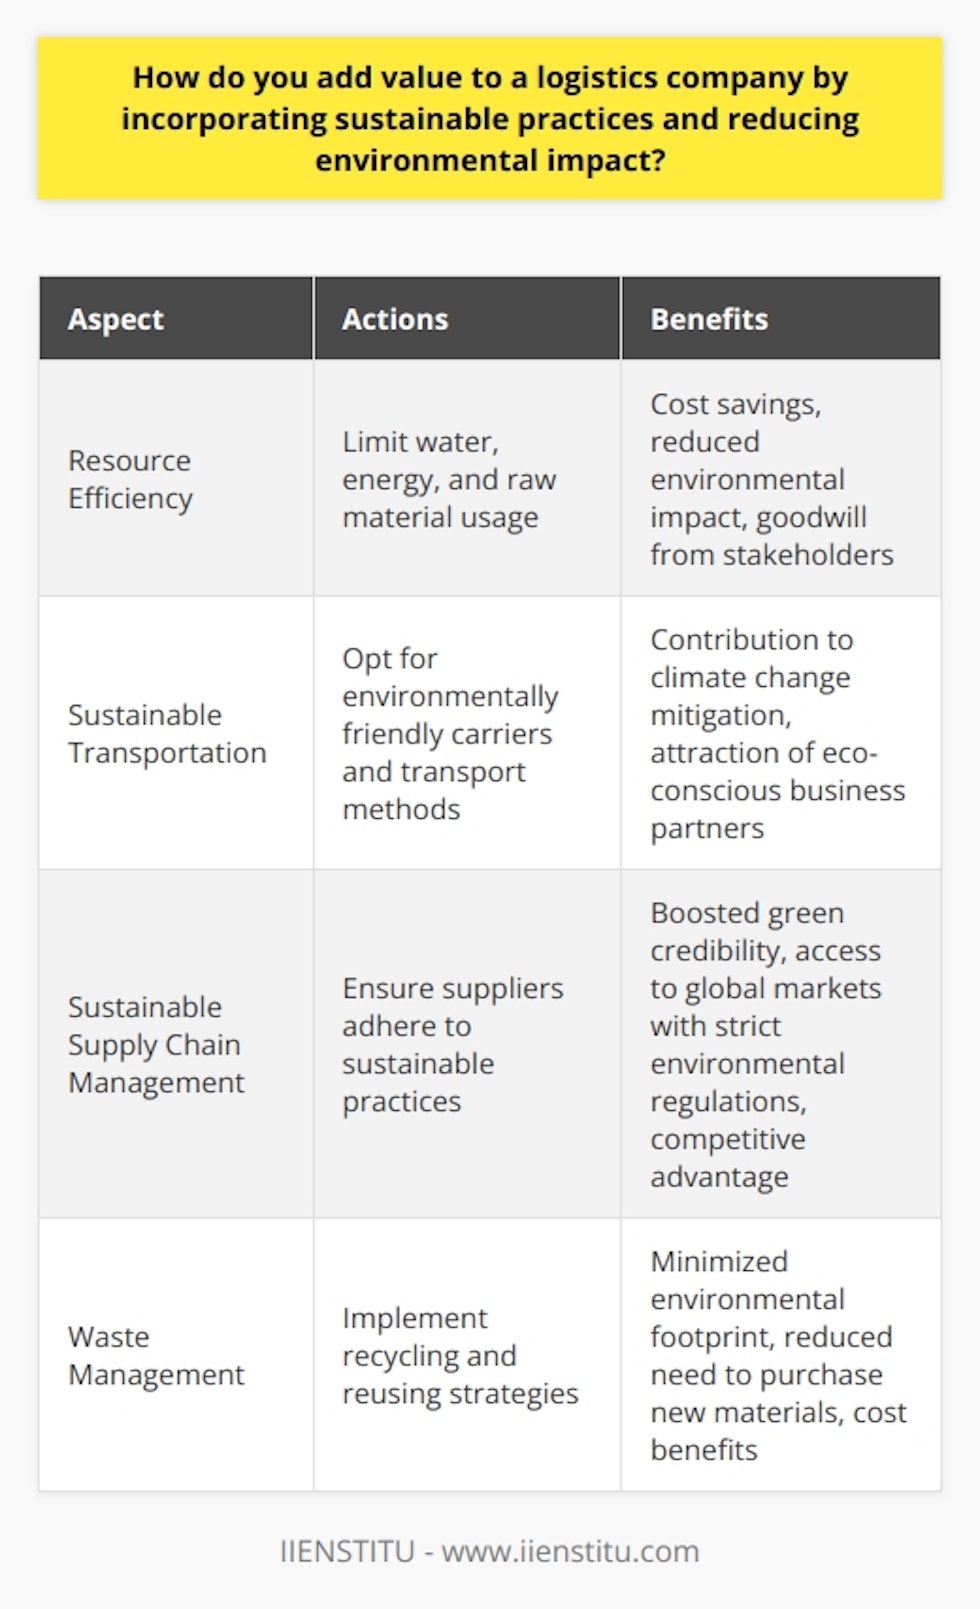 Adding value to a logistics company by incorporating sustainable practices and reducing environmental impact is essential in today's world. Not only does it contribute to a better environment, but it also brings benefits such as cost savings and an improved public image.One way to add value is by enhancing resource efficiency. Logistics companies can limit their usage of water, energy, and raw materials. By doing so, they not only reduce their environmental impact but also save costs in the long run. This commitment to sustainable practices also earns goodwill from stakeholders who appreciate the company's efforts.Sustainable transportation is another important aspect. Companies can opt for environmentally friendly carriers and transport methods that emit fewer greenhouse gases. This directly contributes to the global goal of mitigating climate change. Additionally, using green vehicles can attract business partners who prioritize eco-conscious organizations.Sustainable supply chain management is also crucial. Companies should ensure that all suppliers adhere to sustainable practices. An eco-friendly supply chain not only boosts the company's green credibility but also provides access to global markets with strict environmental regulations. This offers a competitive advantage in the industry.Waste management plays a significant role in reducing environmental impact. Companies should implement recycling and reusing strategies to minimize their footprint. By doing so, they can reduce the need to purchase new materials and achieve cost benefits as well.In summary, incorporating sustainable practices in a logistics company brings several benefits, including cost savings, an enhanced public image, and a reduced environmental impact. This makes the company more resilient and competitive in the global market. By prioritizing sustainability, a logistics company can contribute to a greener future.